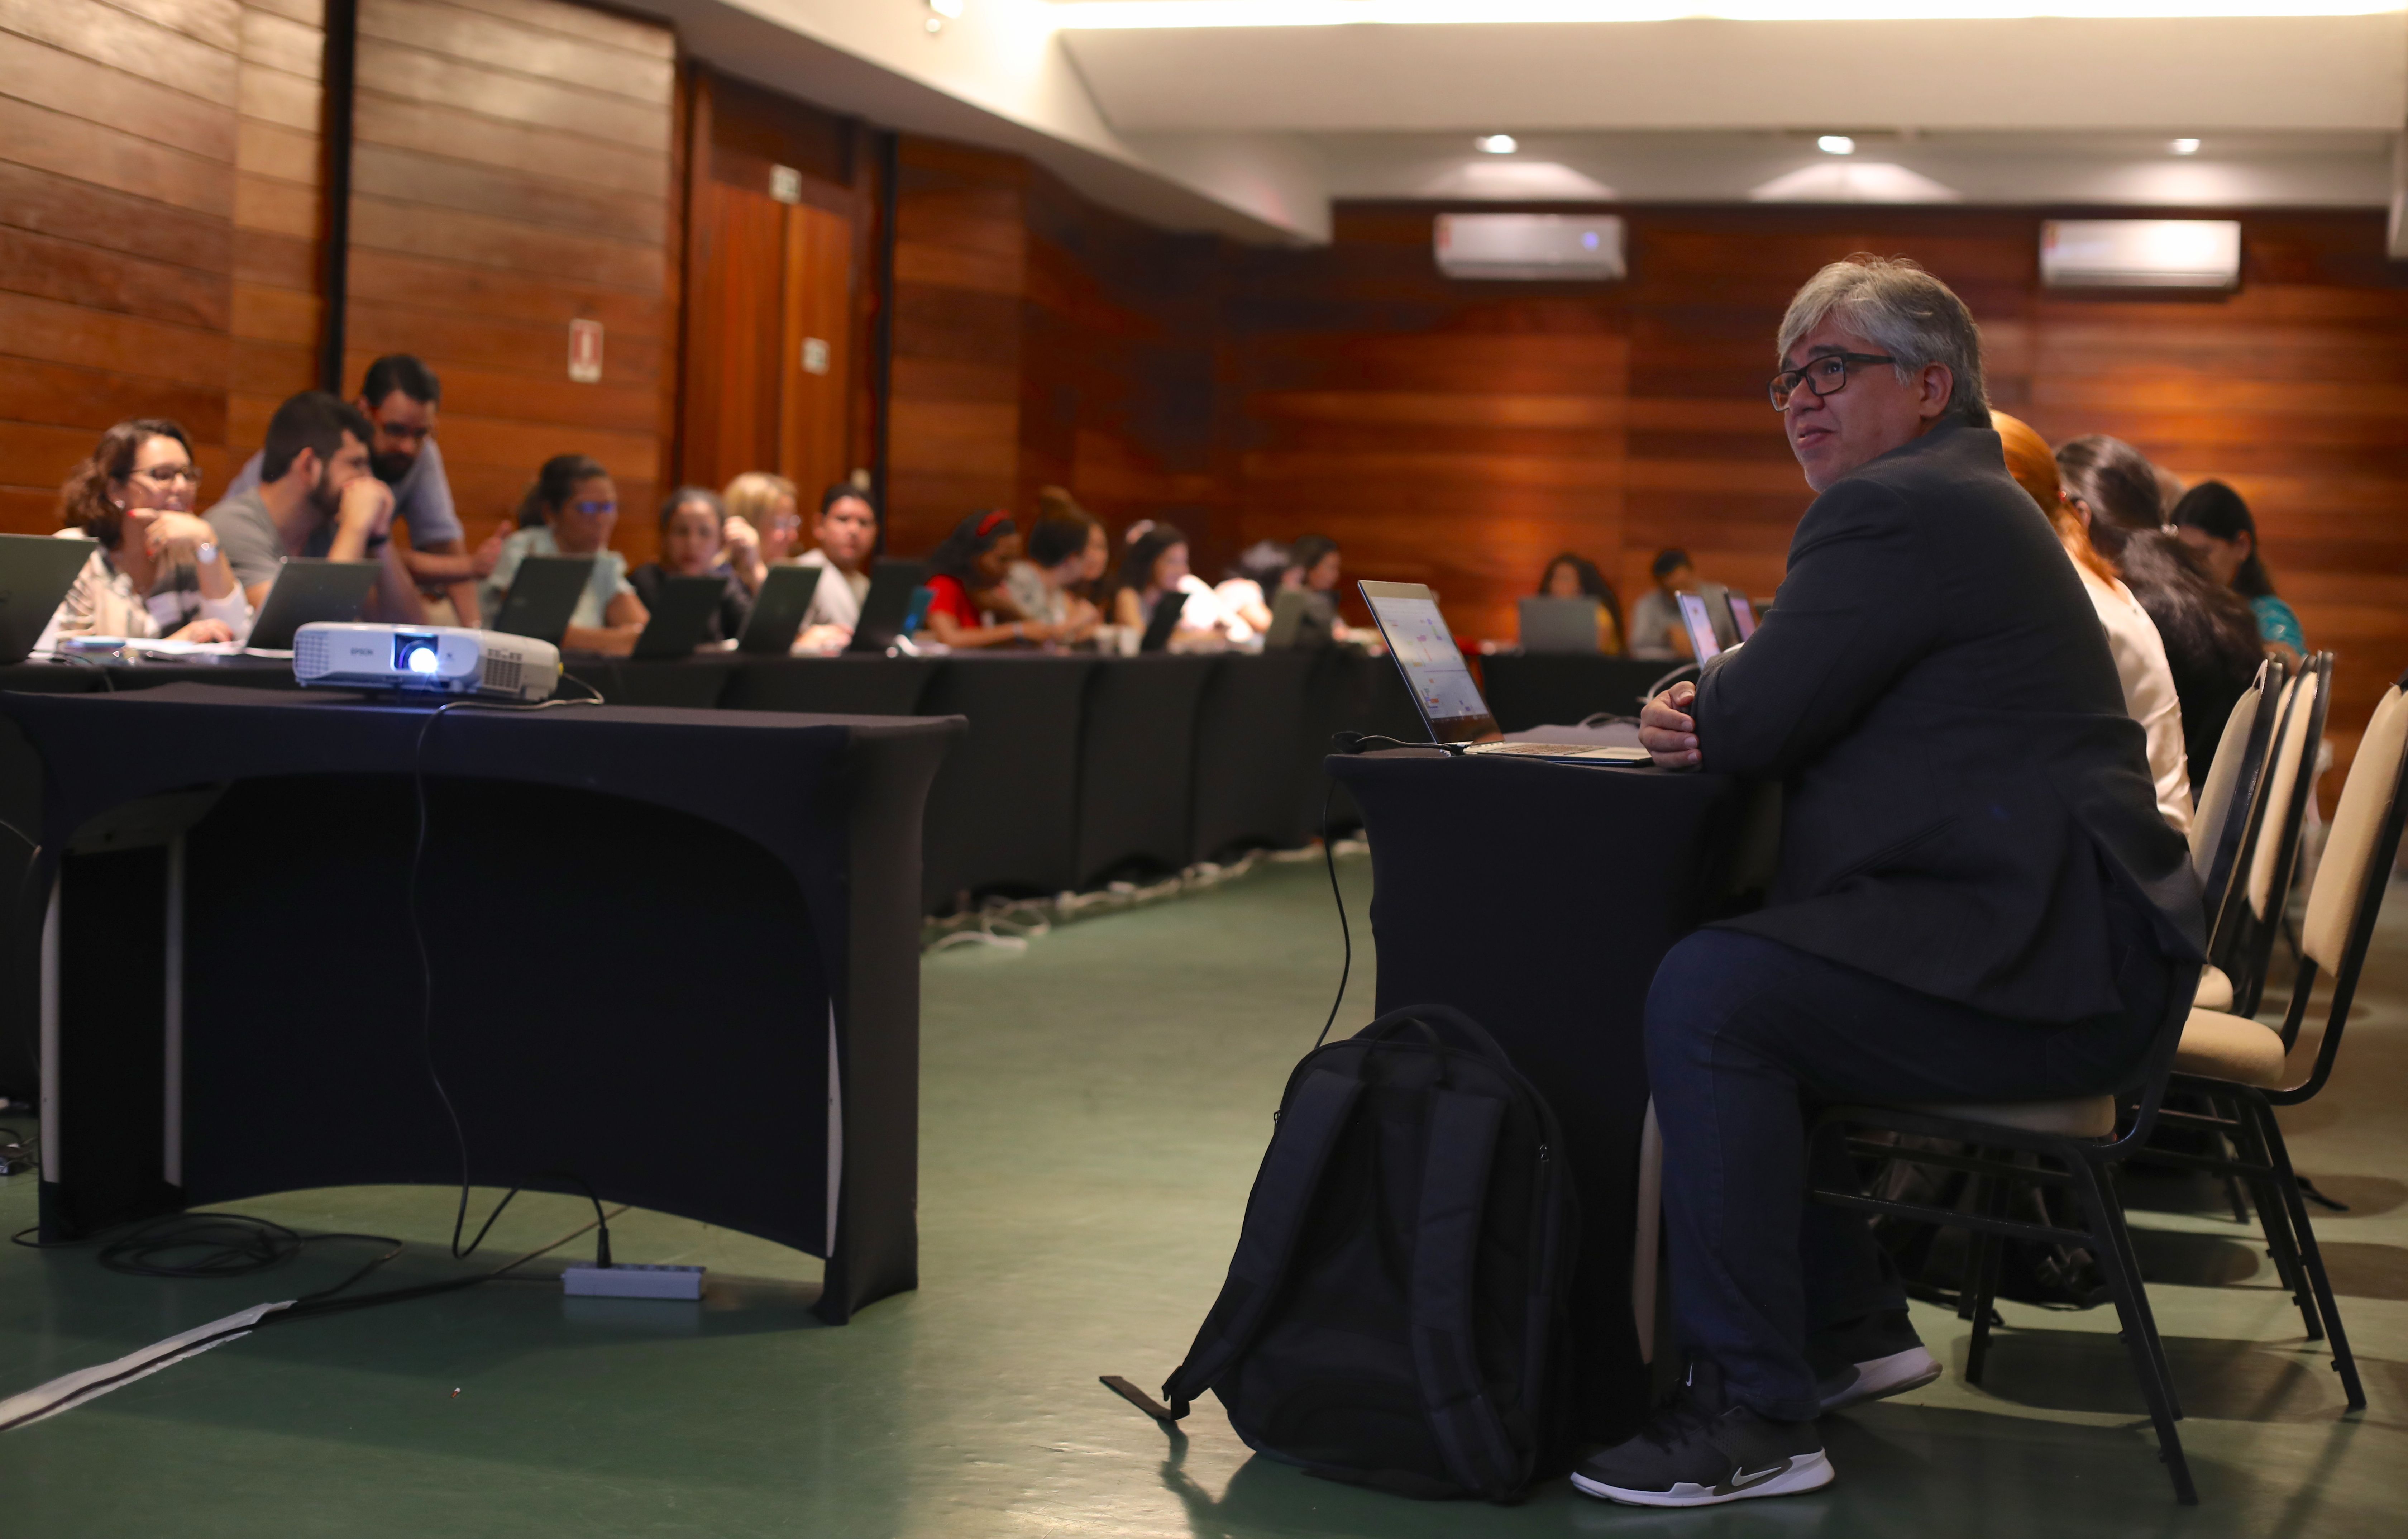 Dr. Claudio Salgado, president of the Brazilian Leprosy Society, listens to a presentation during the first day of the Laboratory of Dermatology Immunology’s brainstorming conference. Image by Anton L. Delgado. Brazil, 2020.